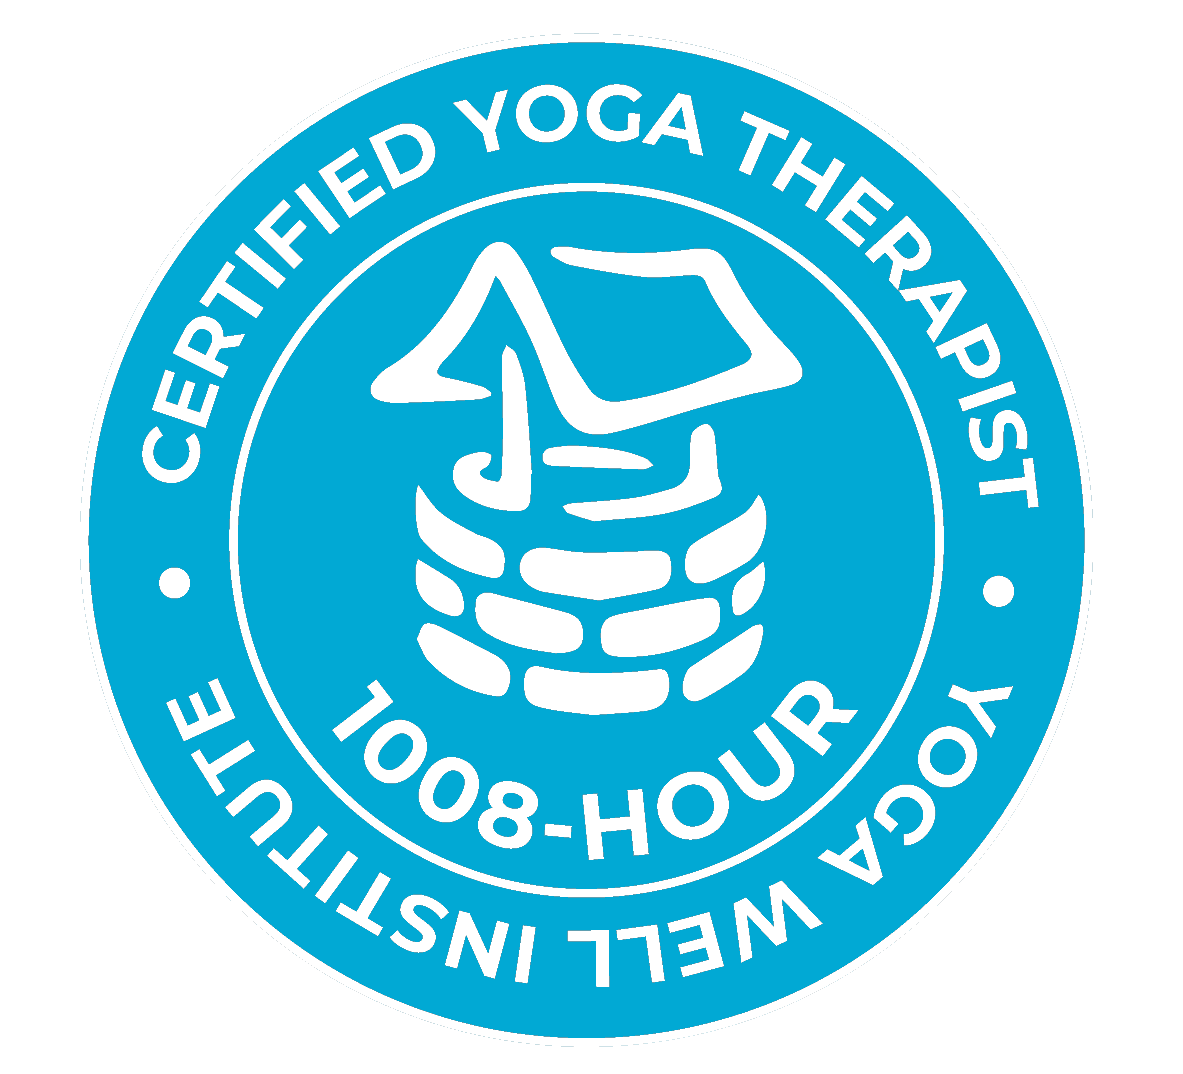 Yoga Well Certified Therapist Seal